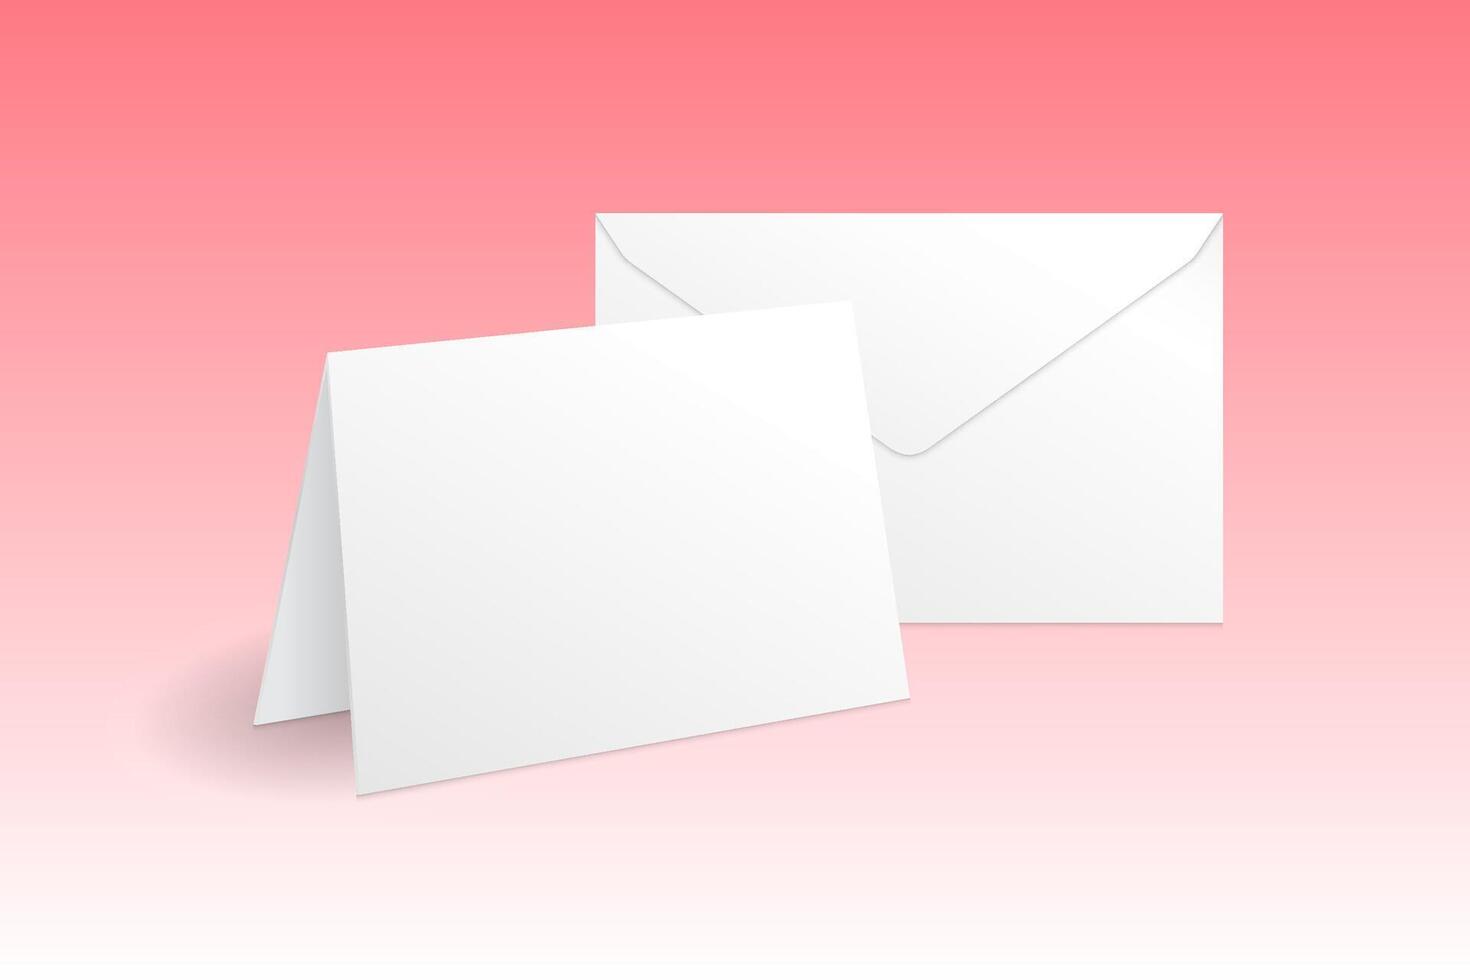 White standing greeting card and envelope mockup template. Isolated on gradient pink background with shadow. vector